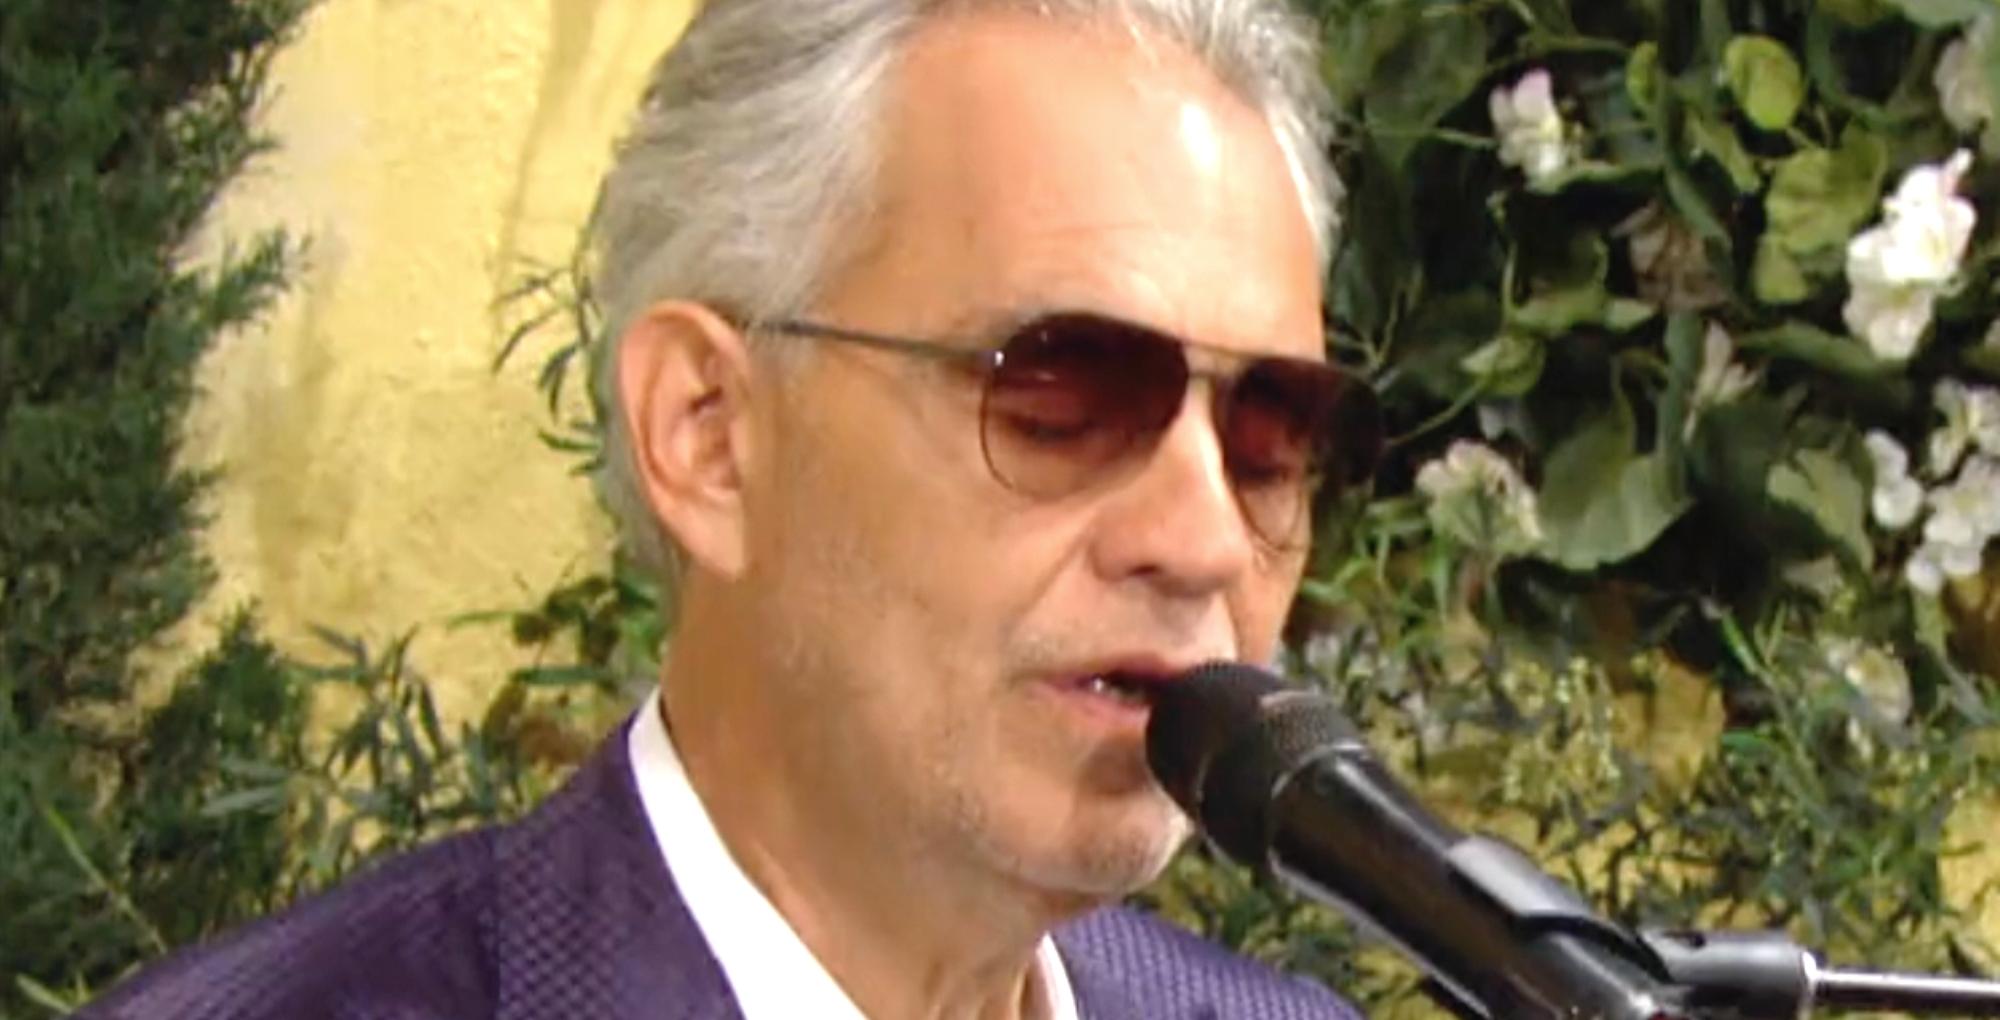 the bold and the beautiful spoilers for june 26, 2023, have andrea bocelli singing.